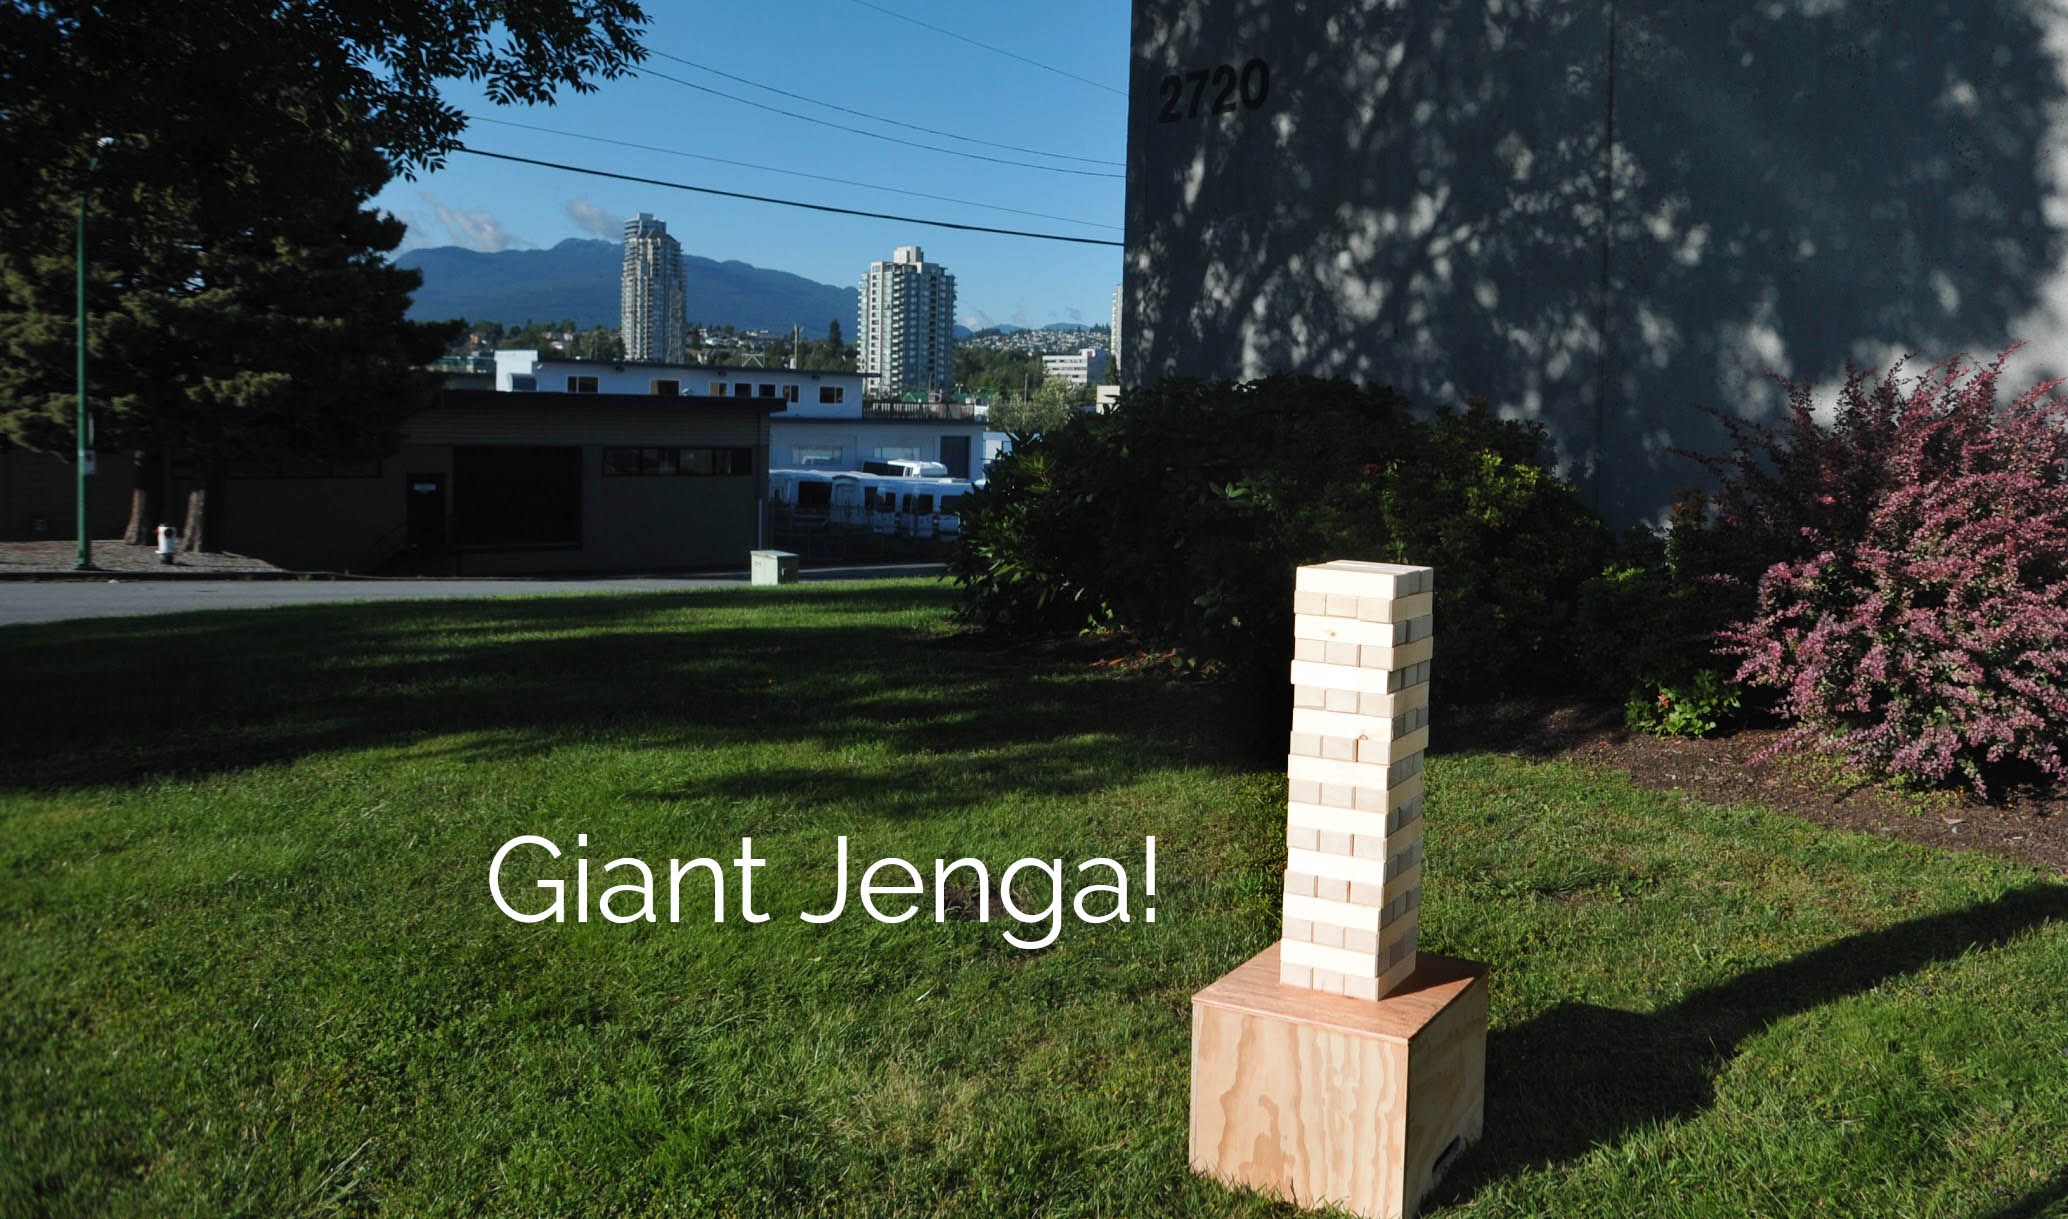 Giant Jenga - the carry box doubles as the platform